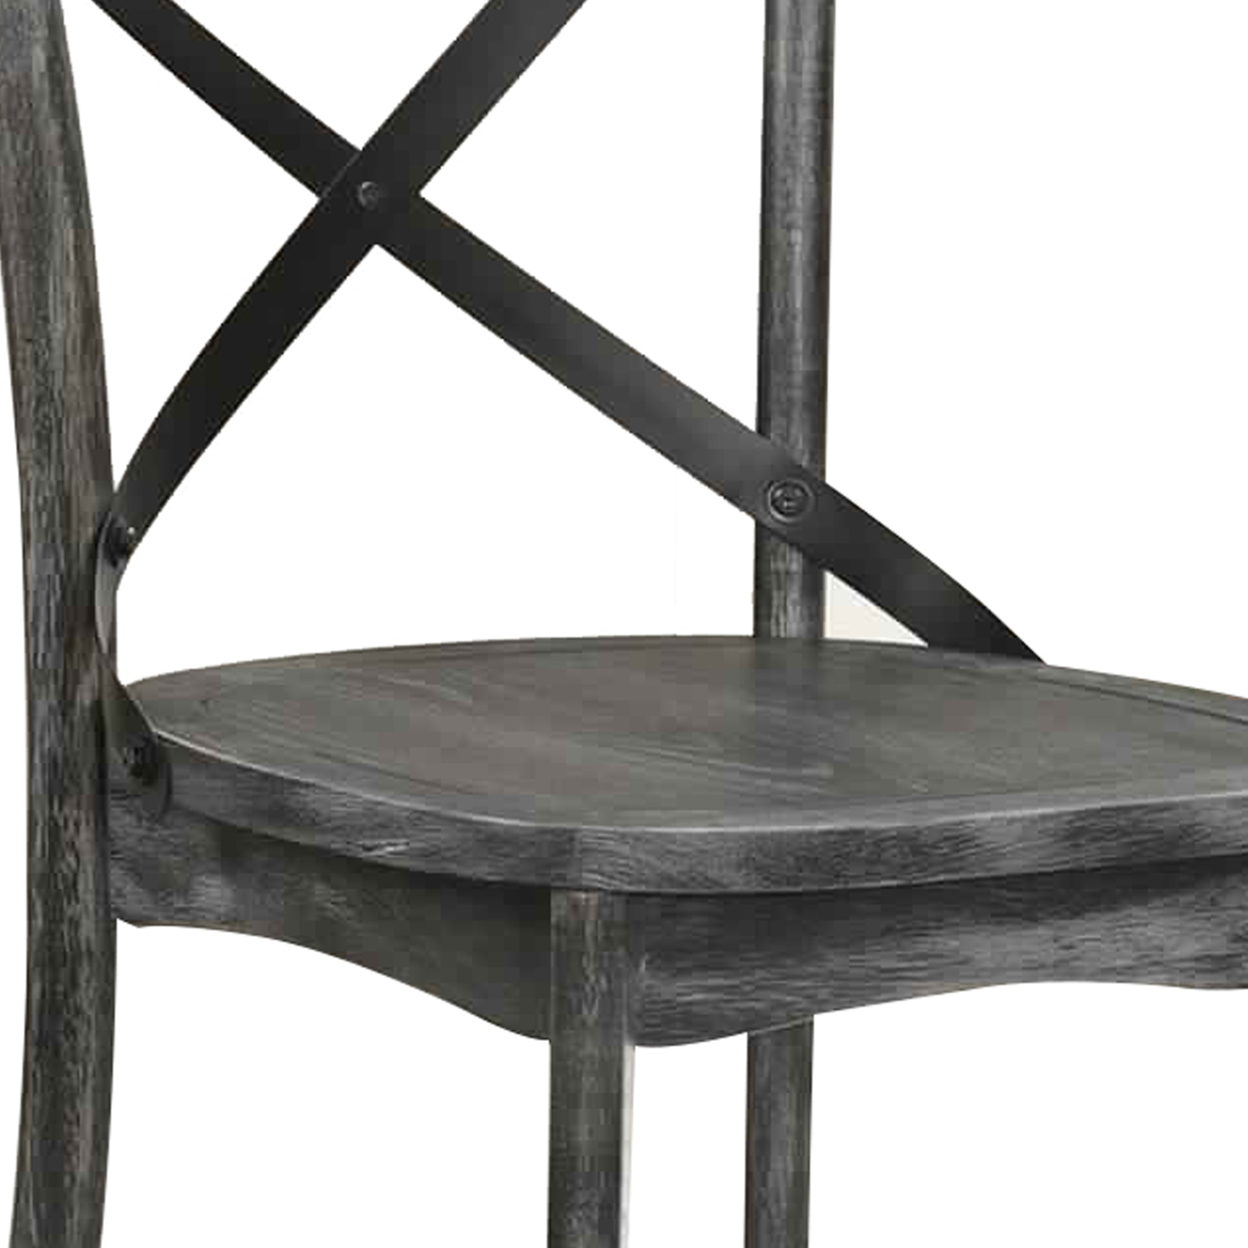 Wood And Metal Side Chair With X Open Back, Set Of 2, Rustic Gray And Black- Saltoro Sherpi